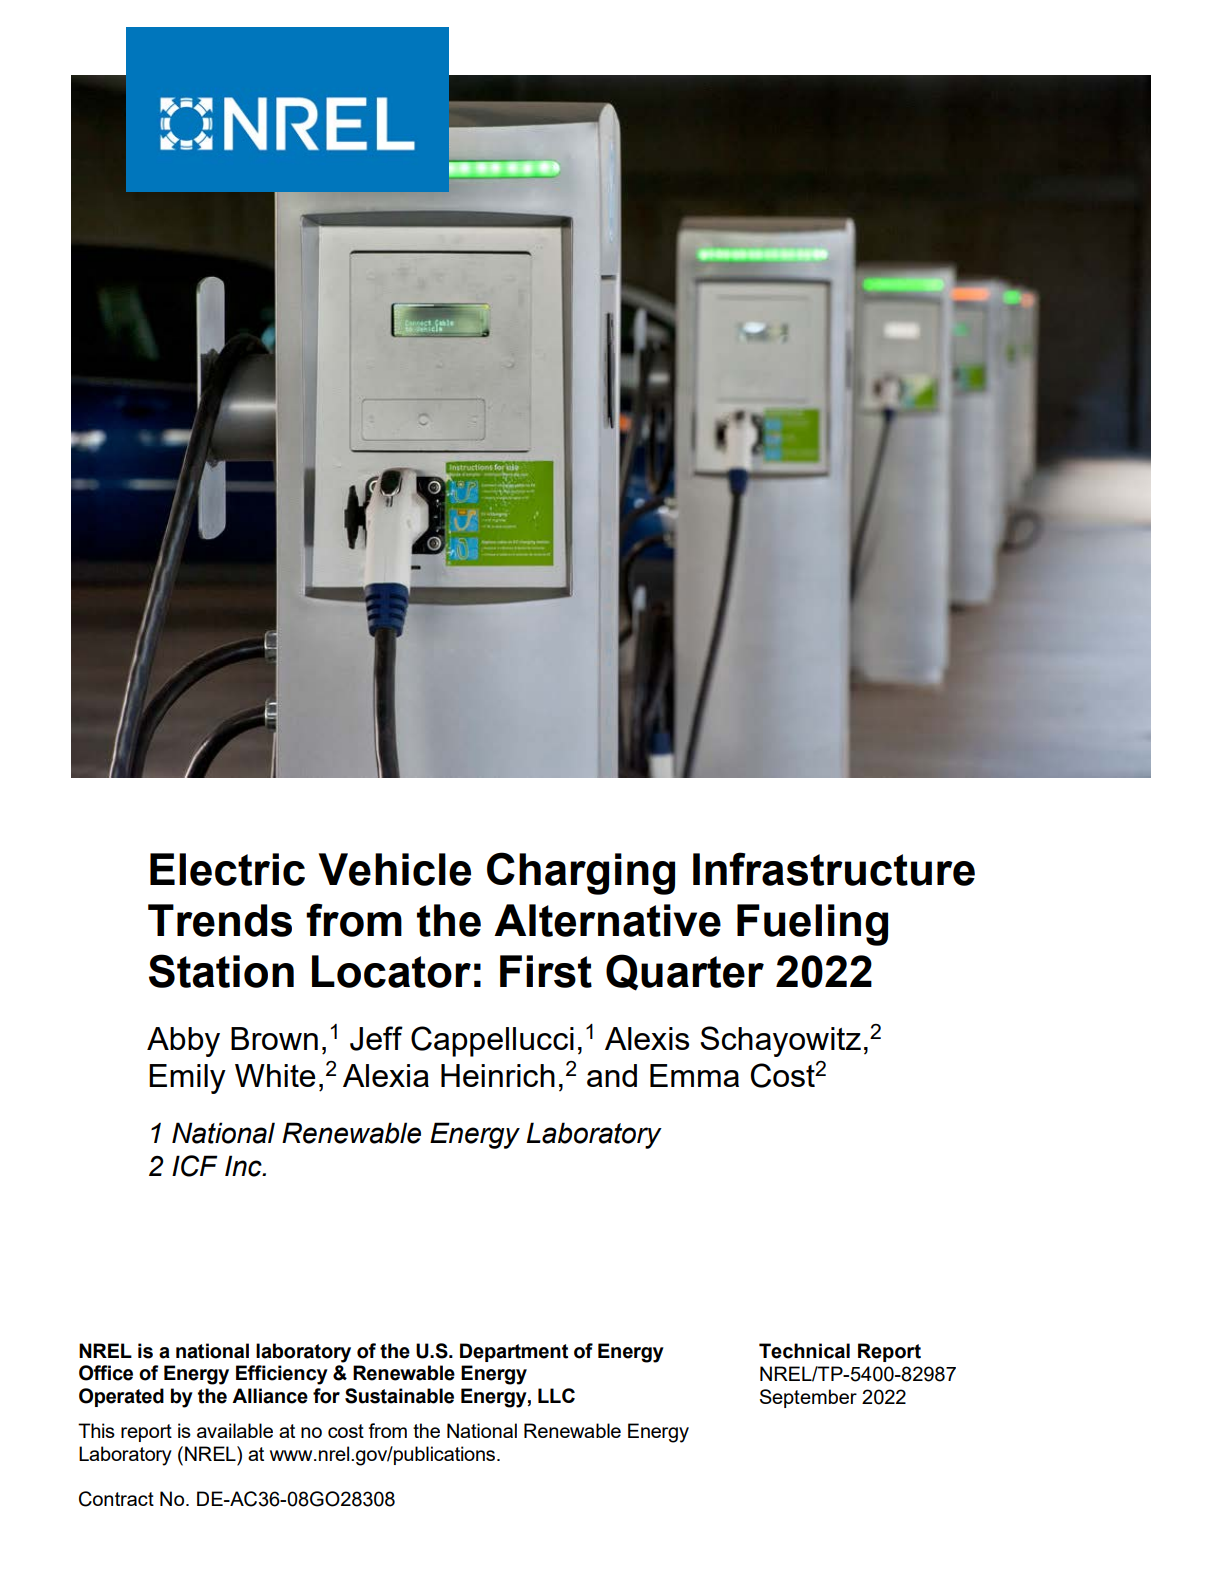 Electric Vehicle Charging Infrastructure Trends from the Alternative